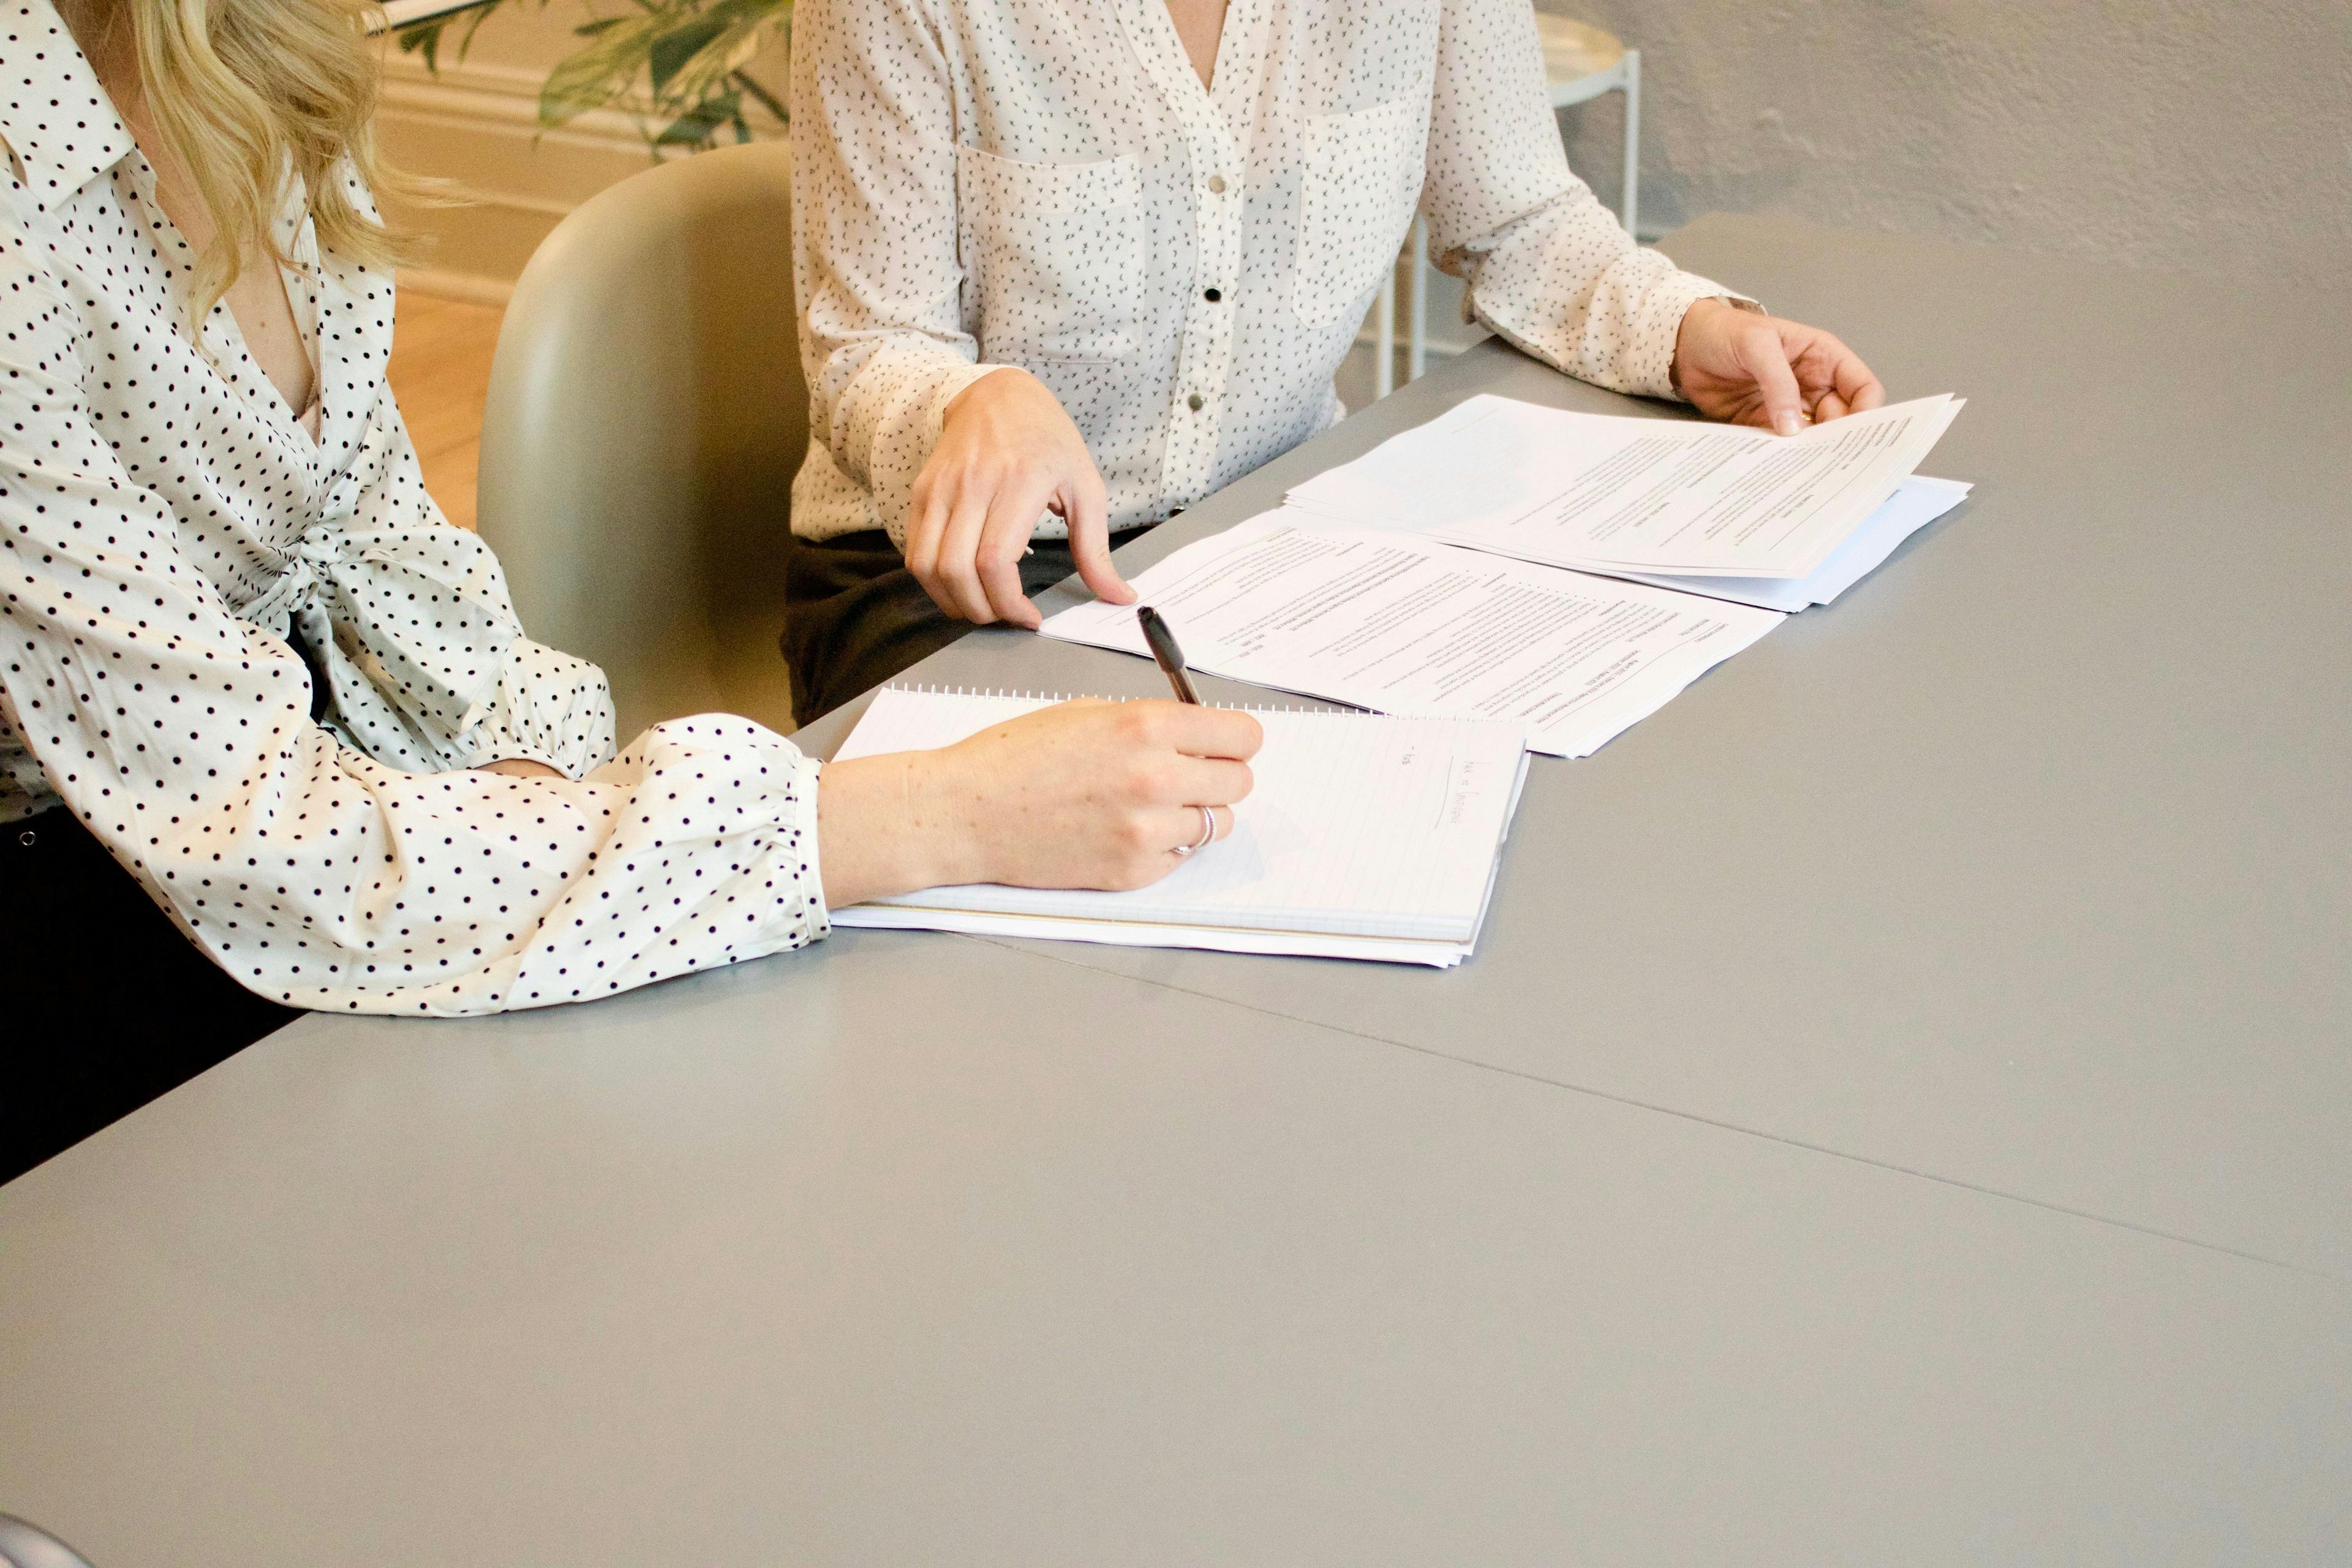 two women sitting around a table signing papers.